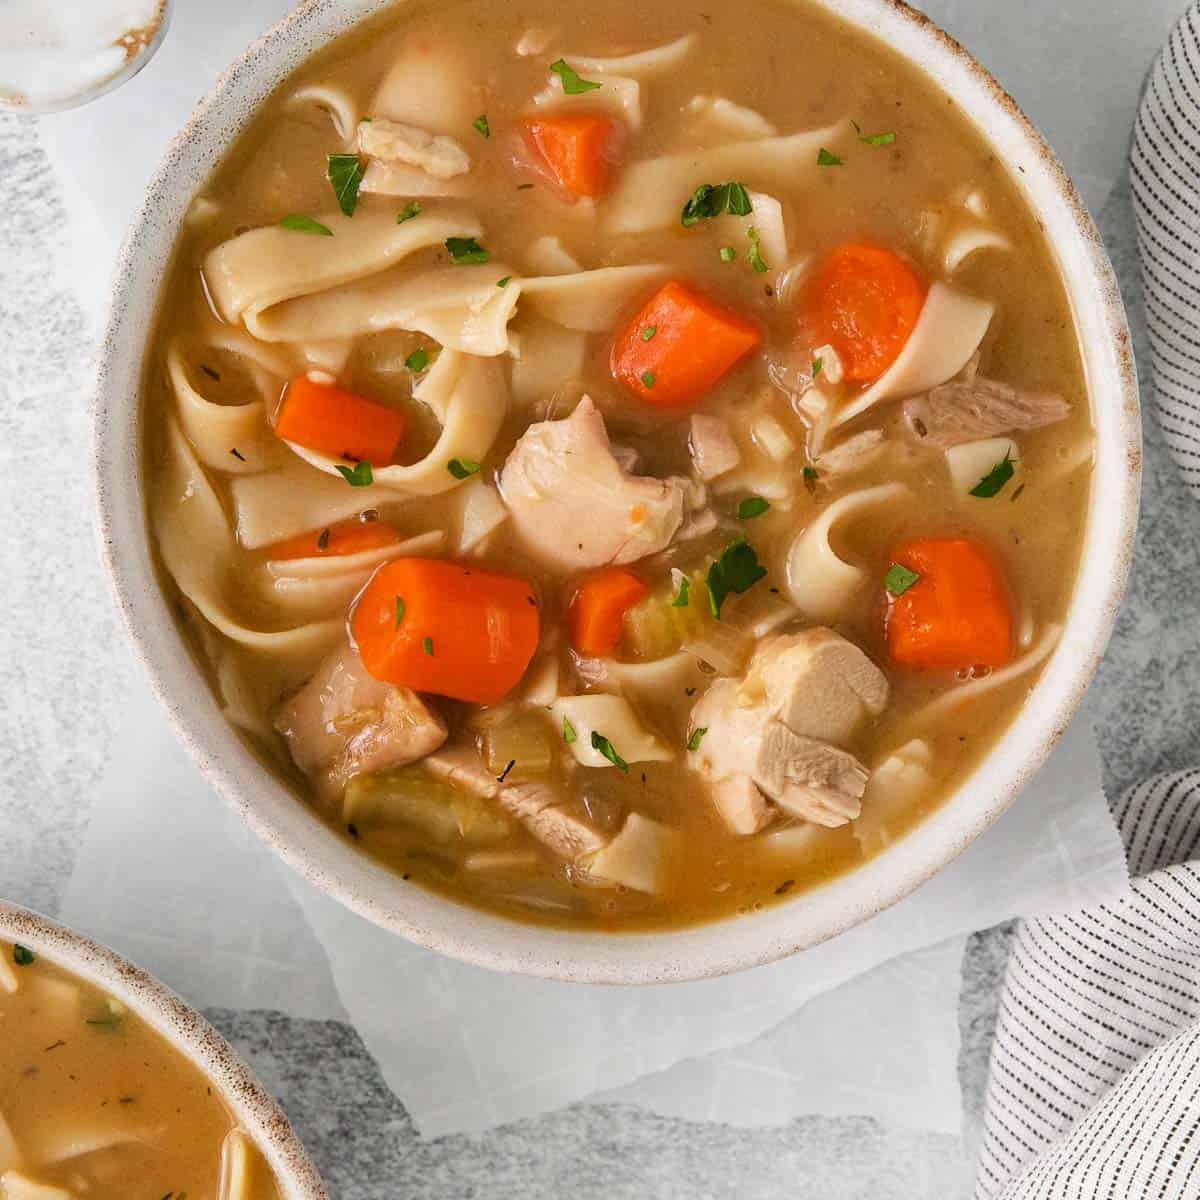 Gluten Free Chickenless Chicken Noodle Soup - Breezy Bakes